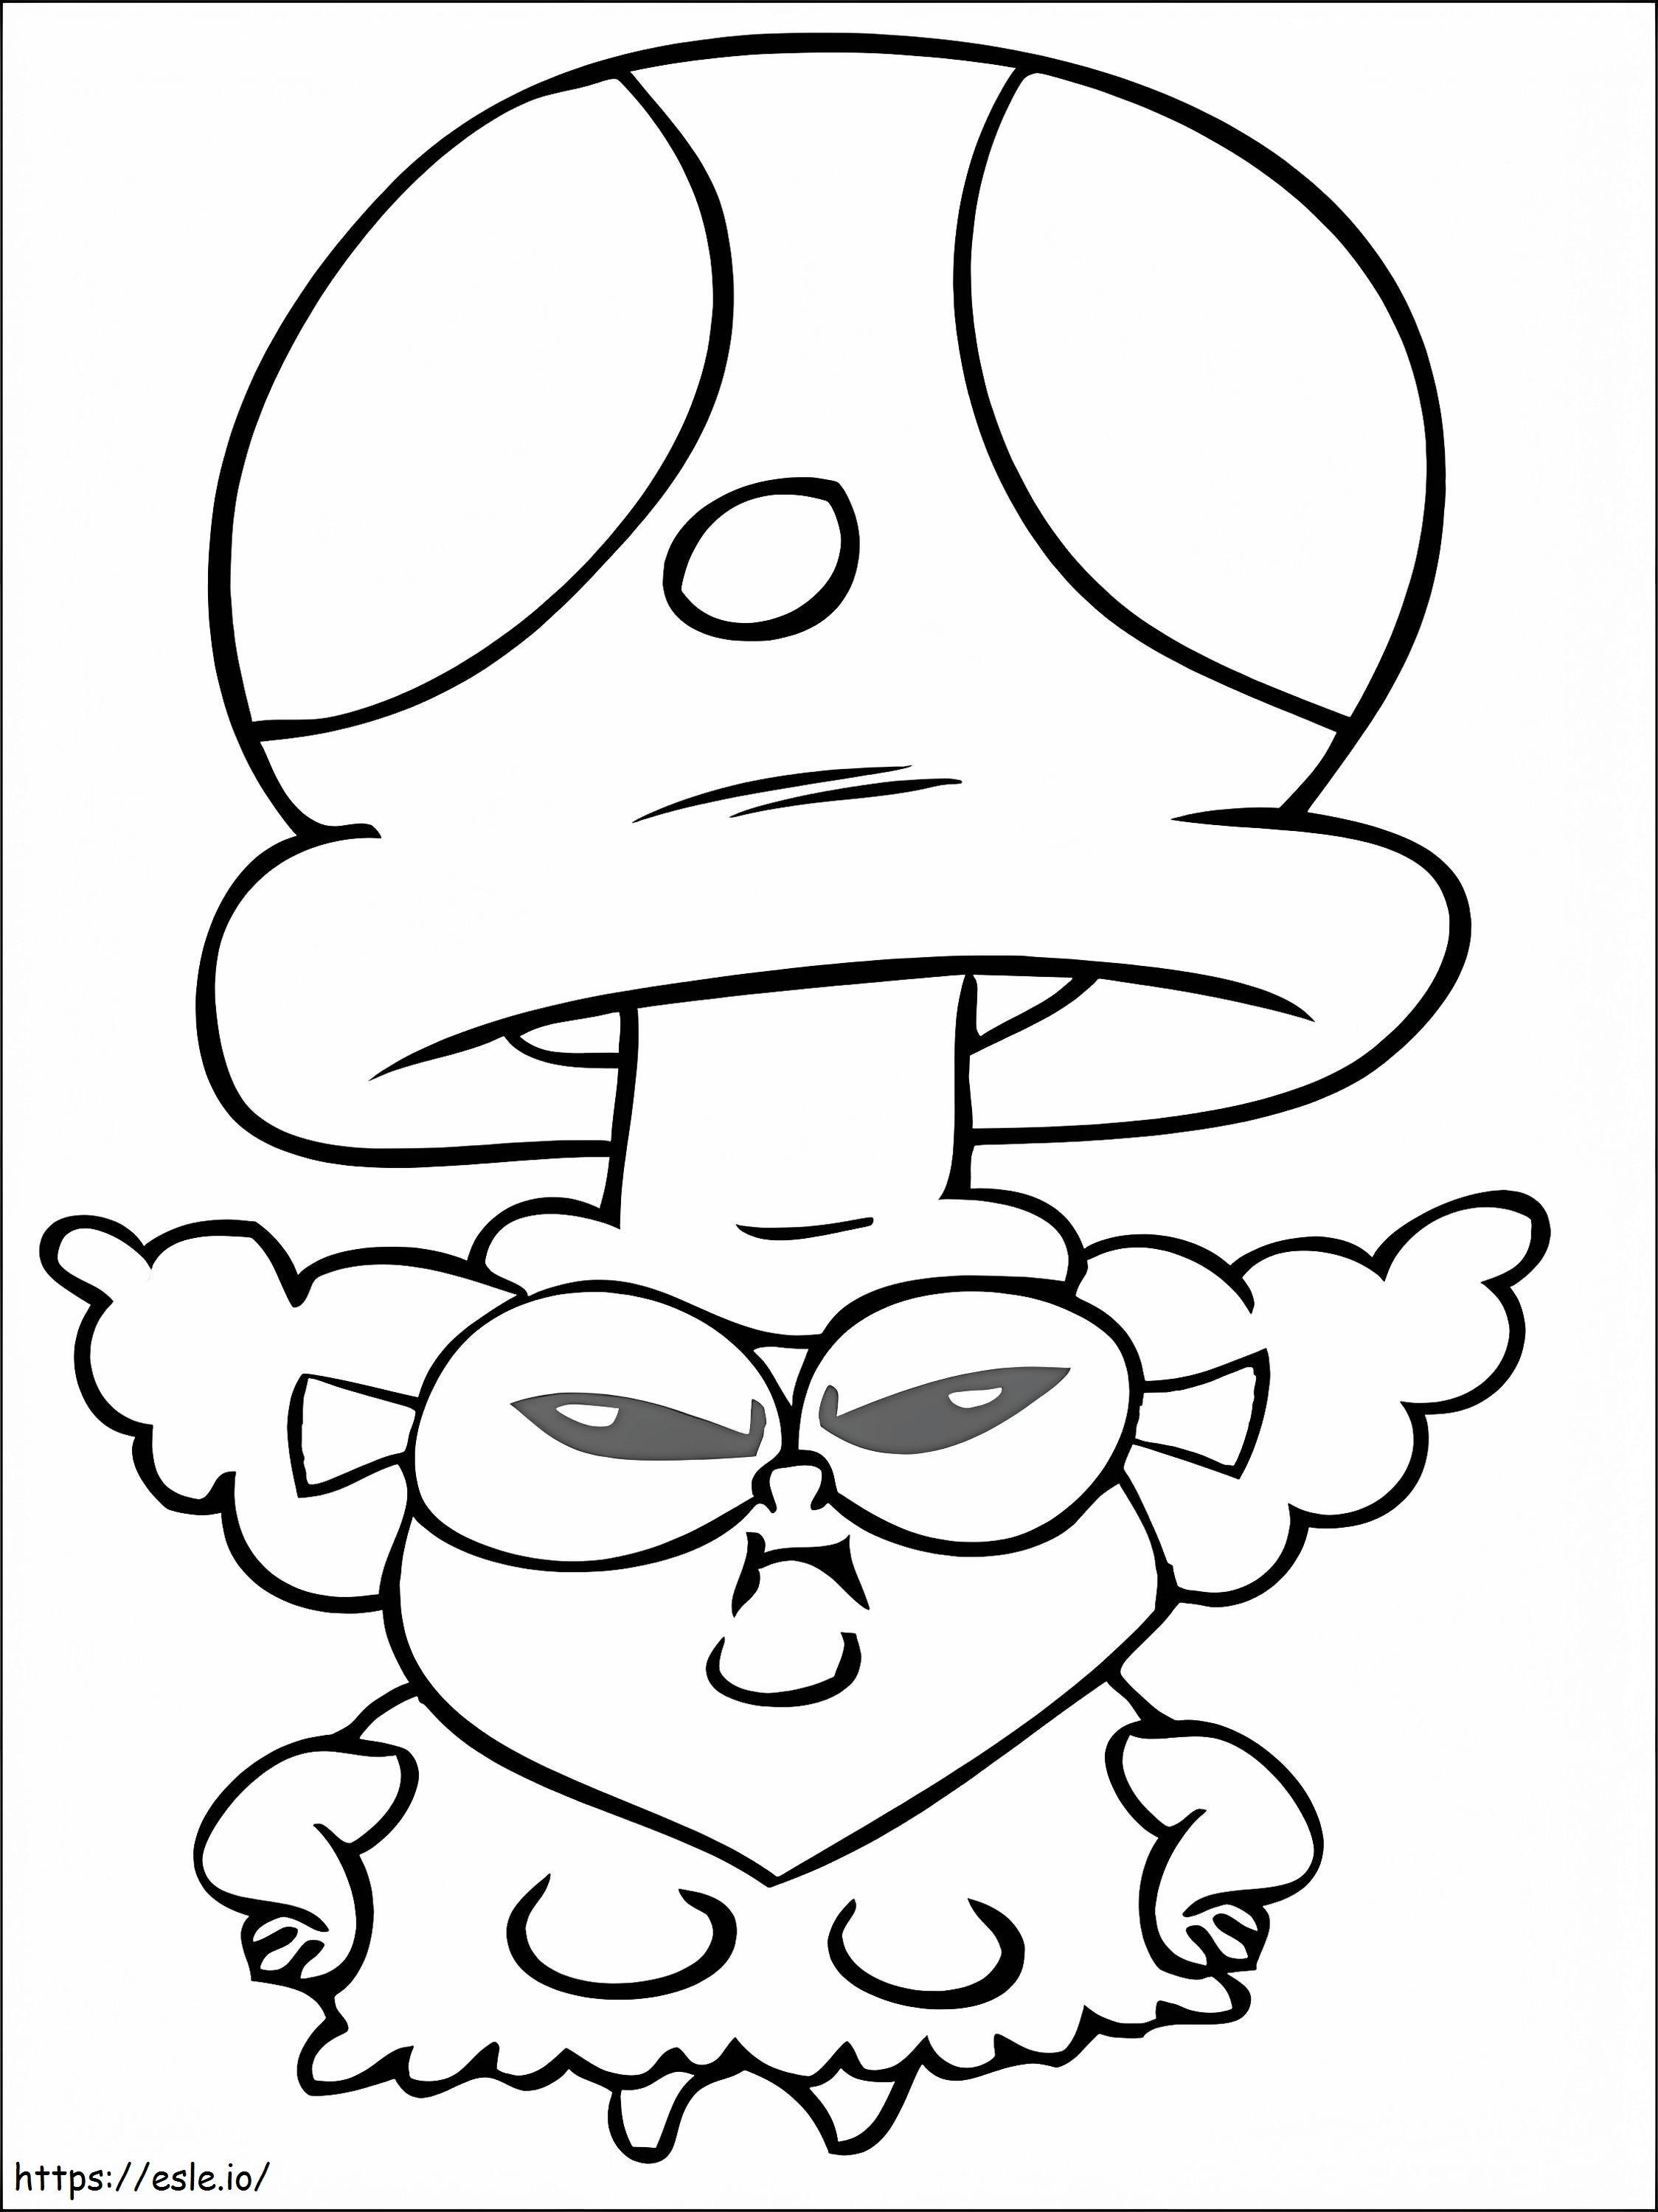 Truffles From Chowder coloring page